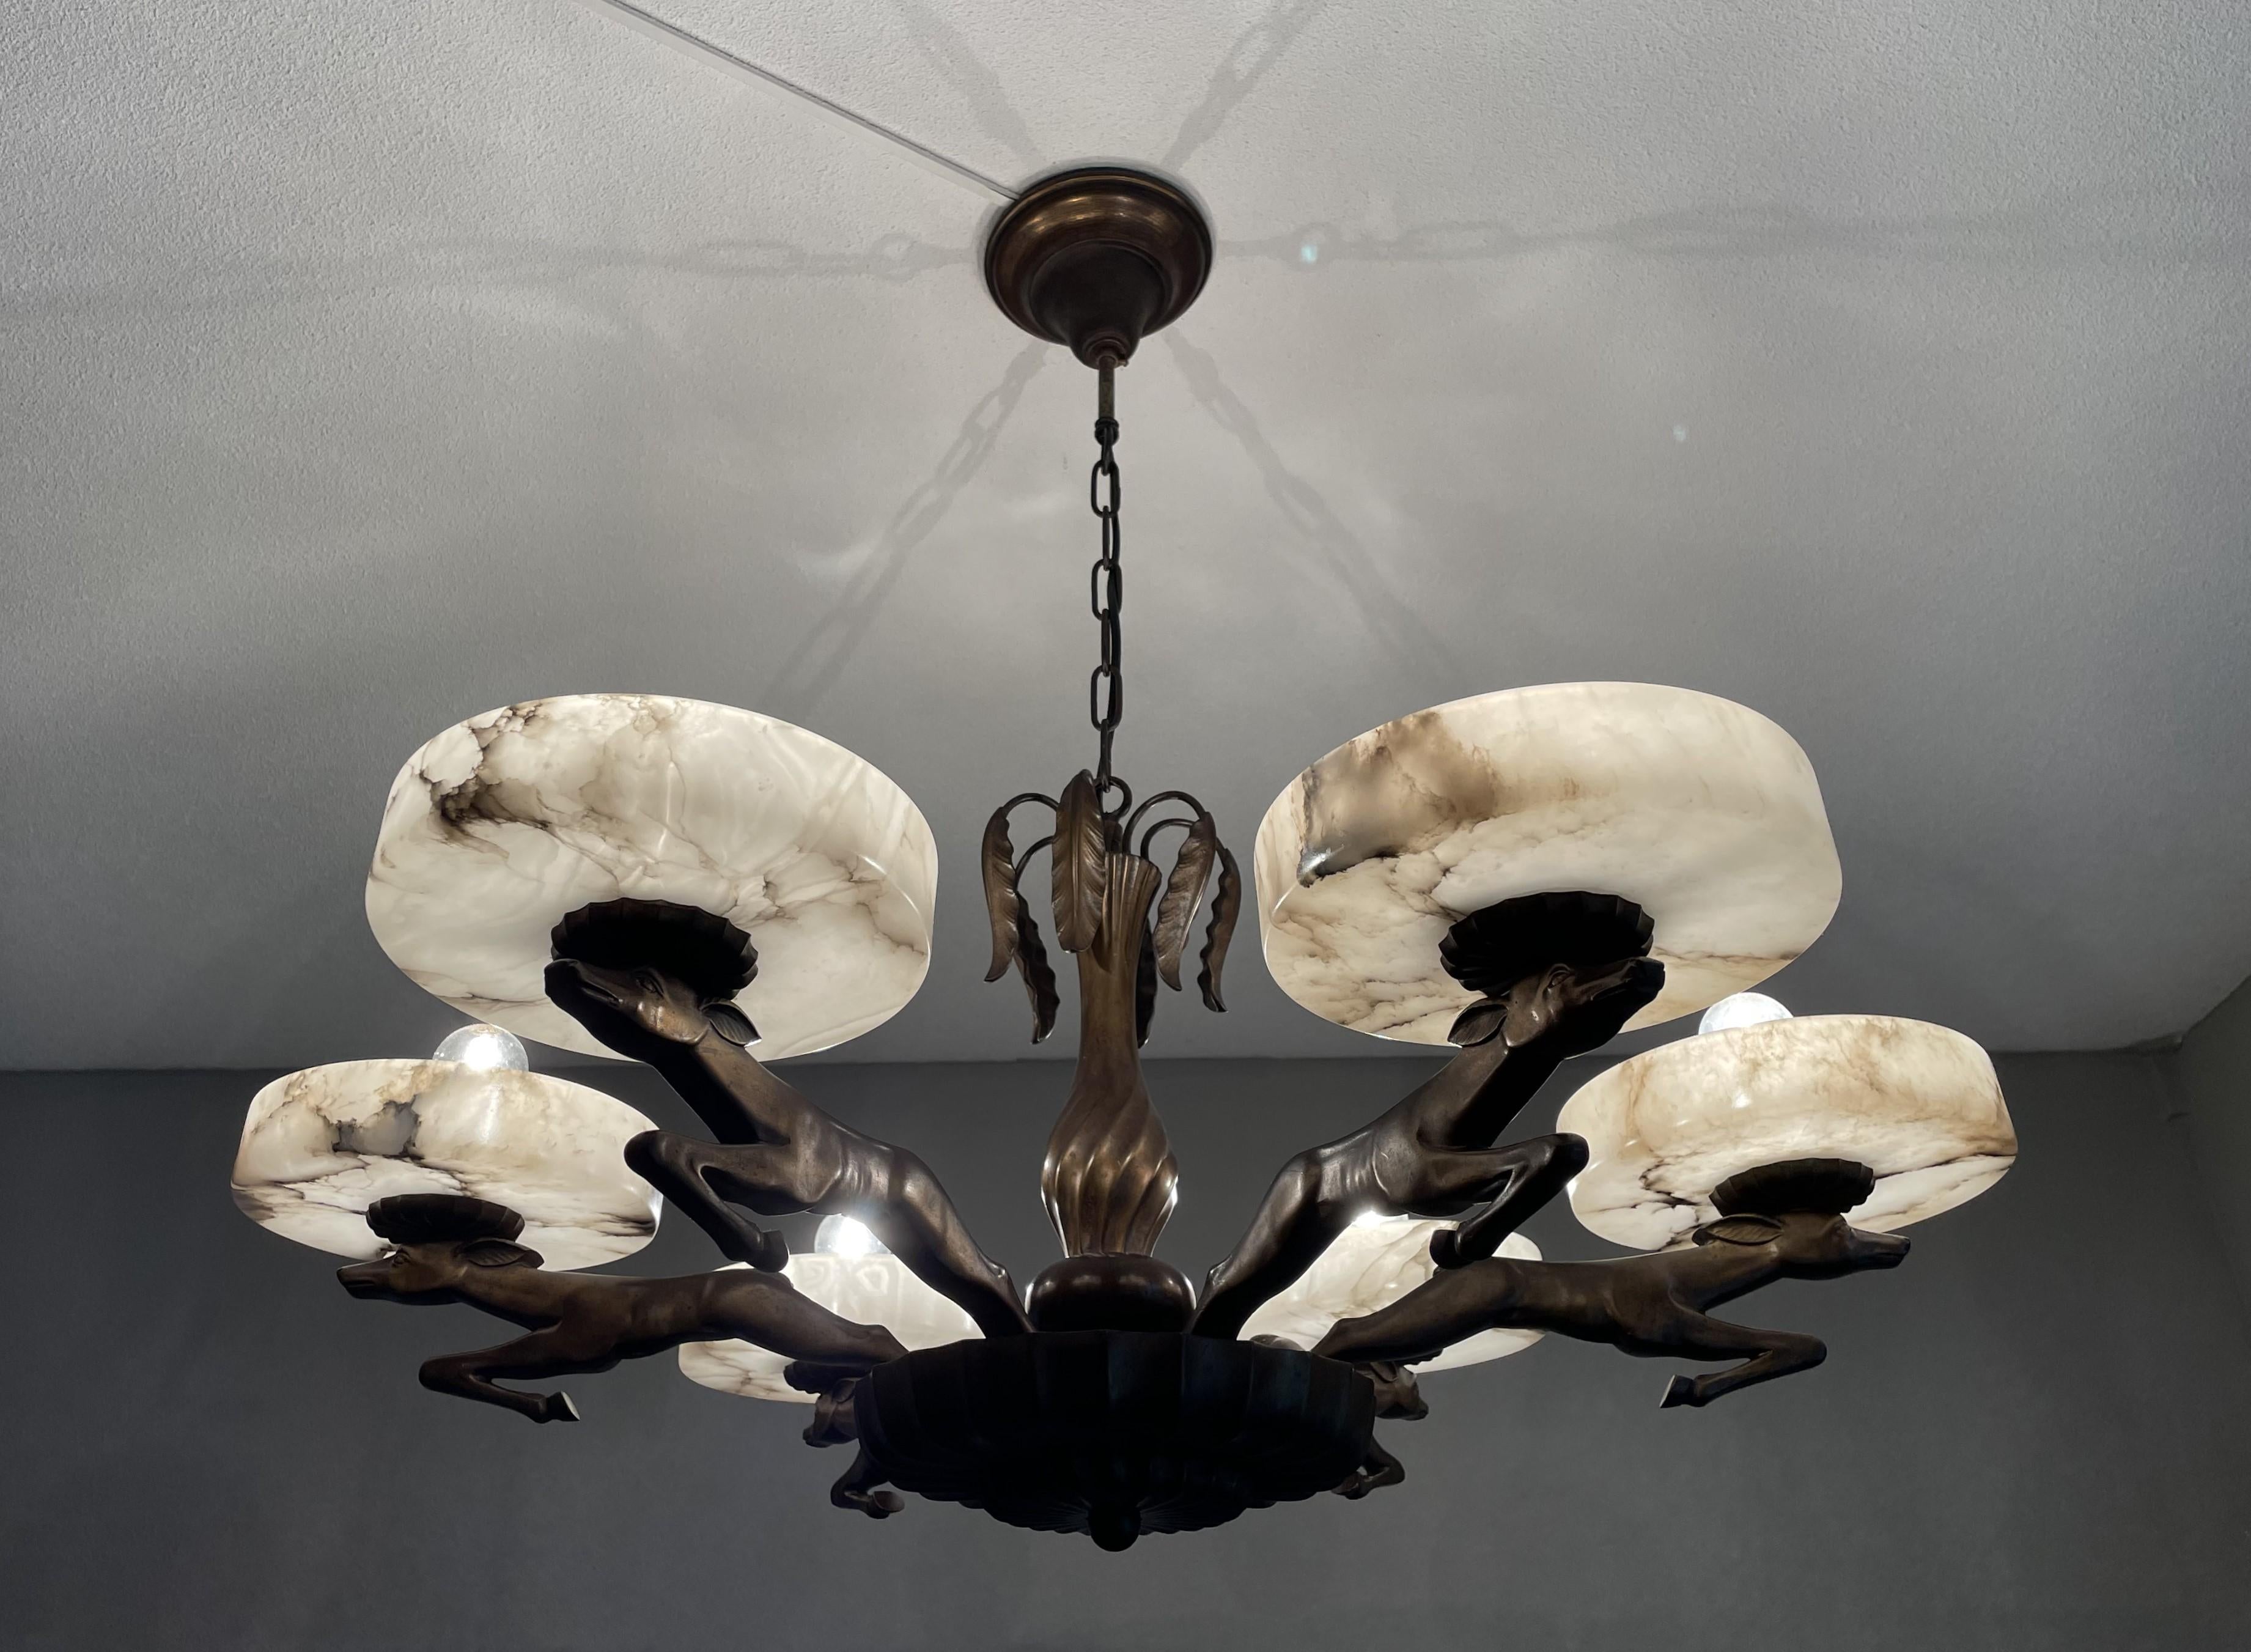 Exclusive bronze and alabaster, pure Art Deco pendant light for the perfect atmosphere.

If you are looking for an awesome light fixture to grace your living space then this antique Art Deco chandelier from the earliest years of the 1900s could very